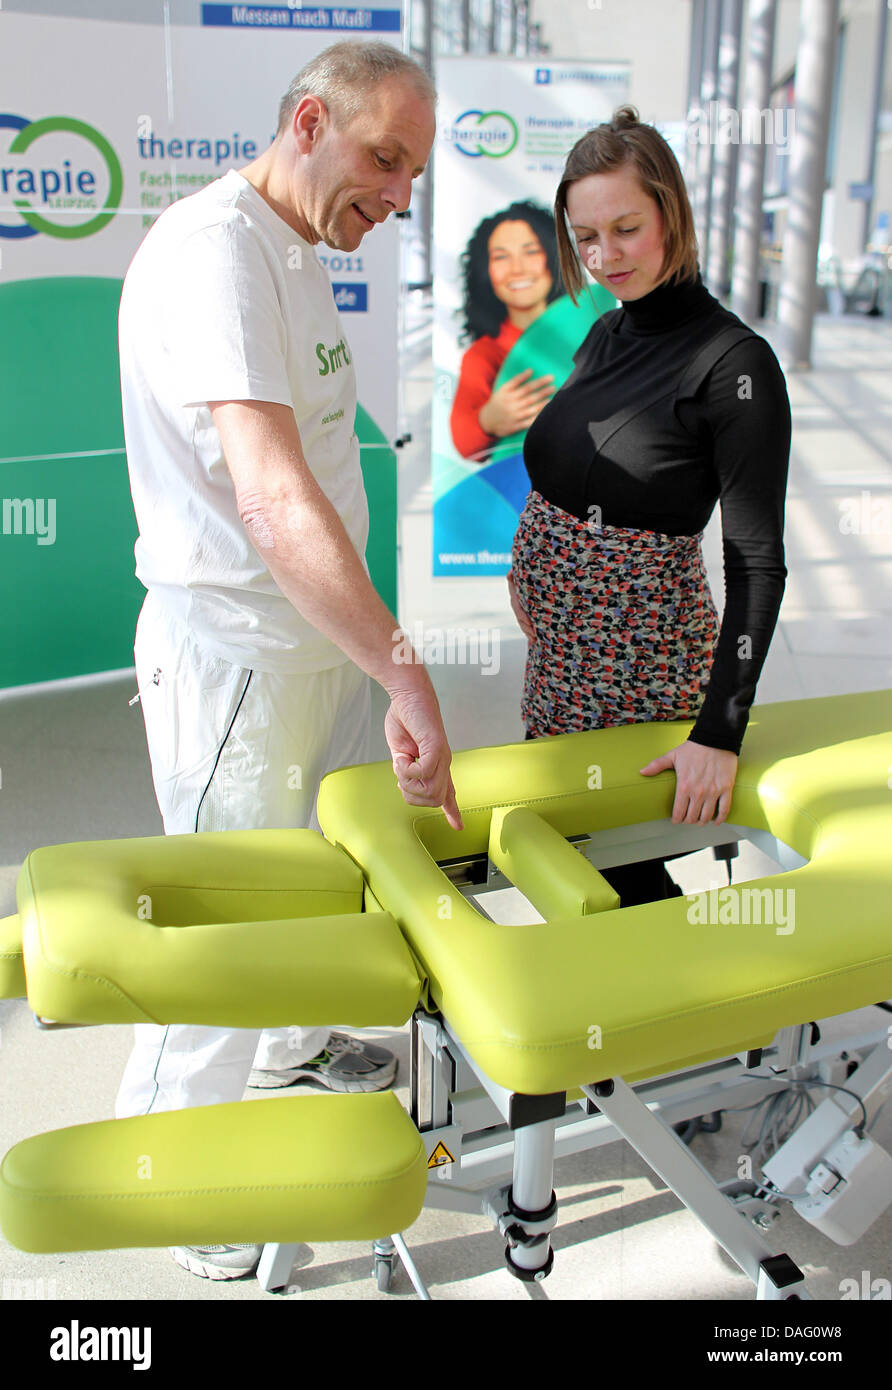 Physio Therapist Rolf Blume Show Madlen Thienel How To Use The Massage Chair For Pregnant Women Smart Xl At The Therapie Leipzig Tradeshow In Leipzig